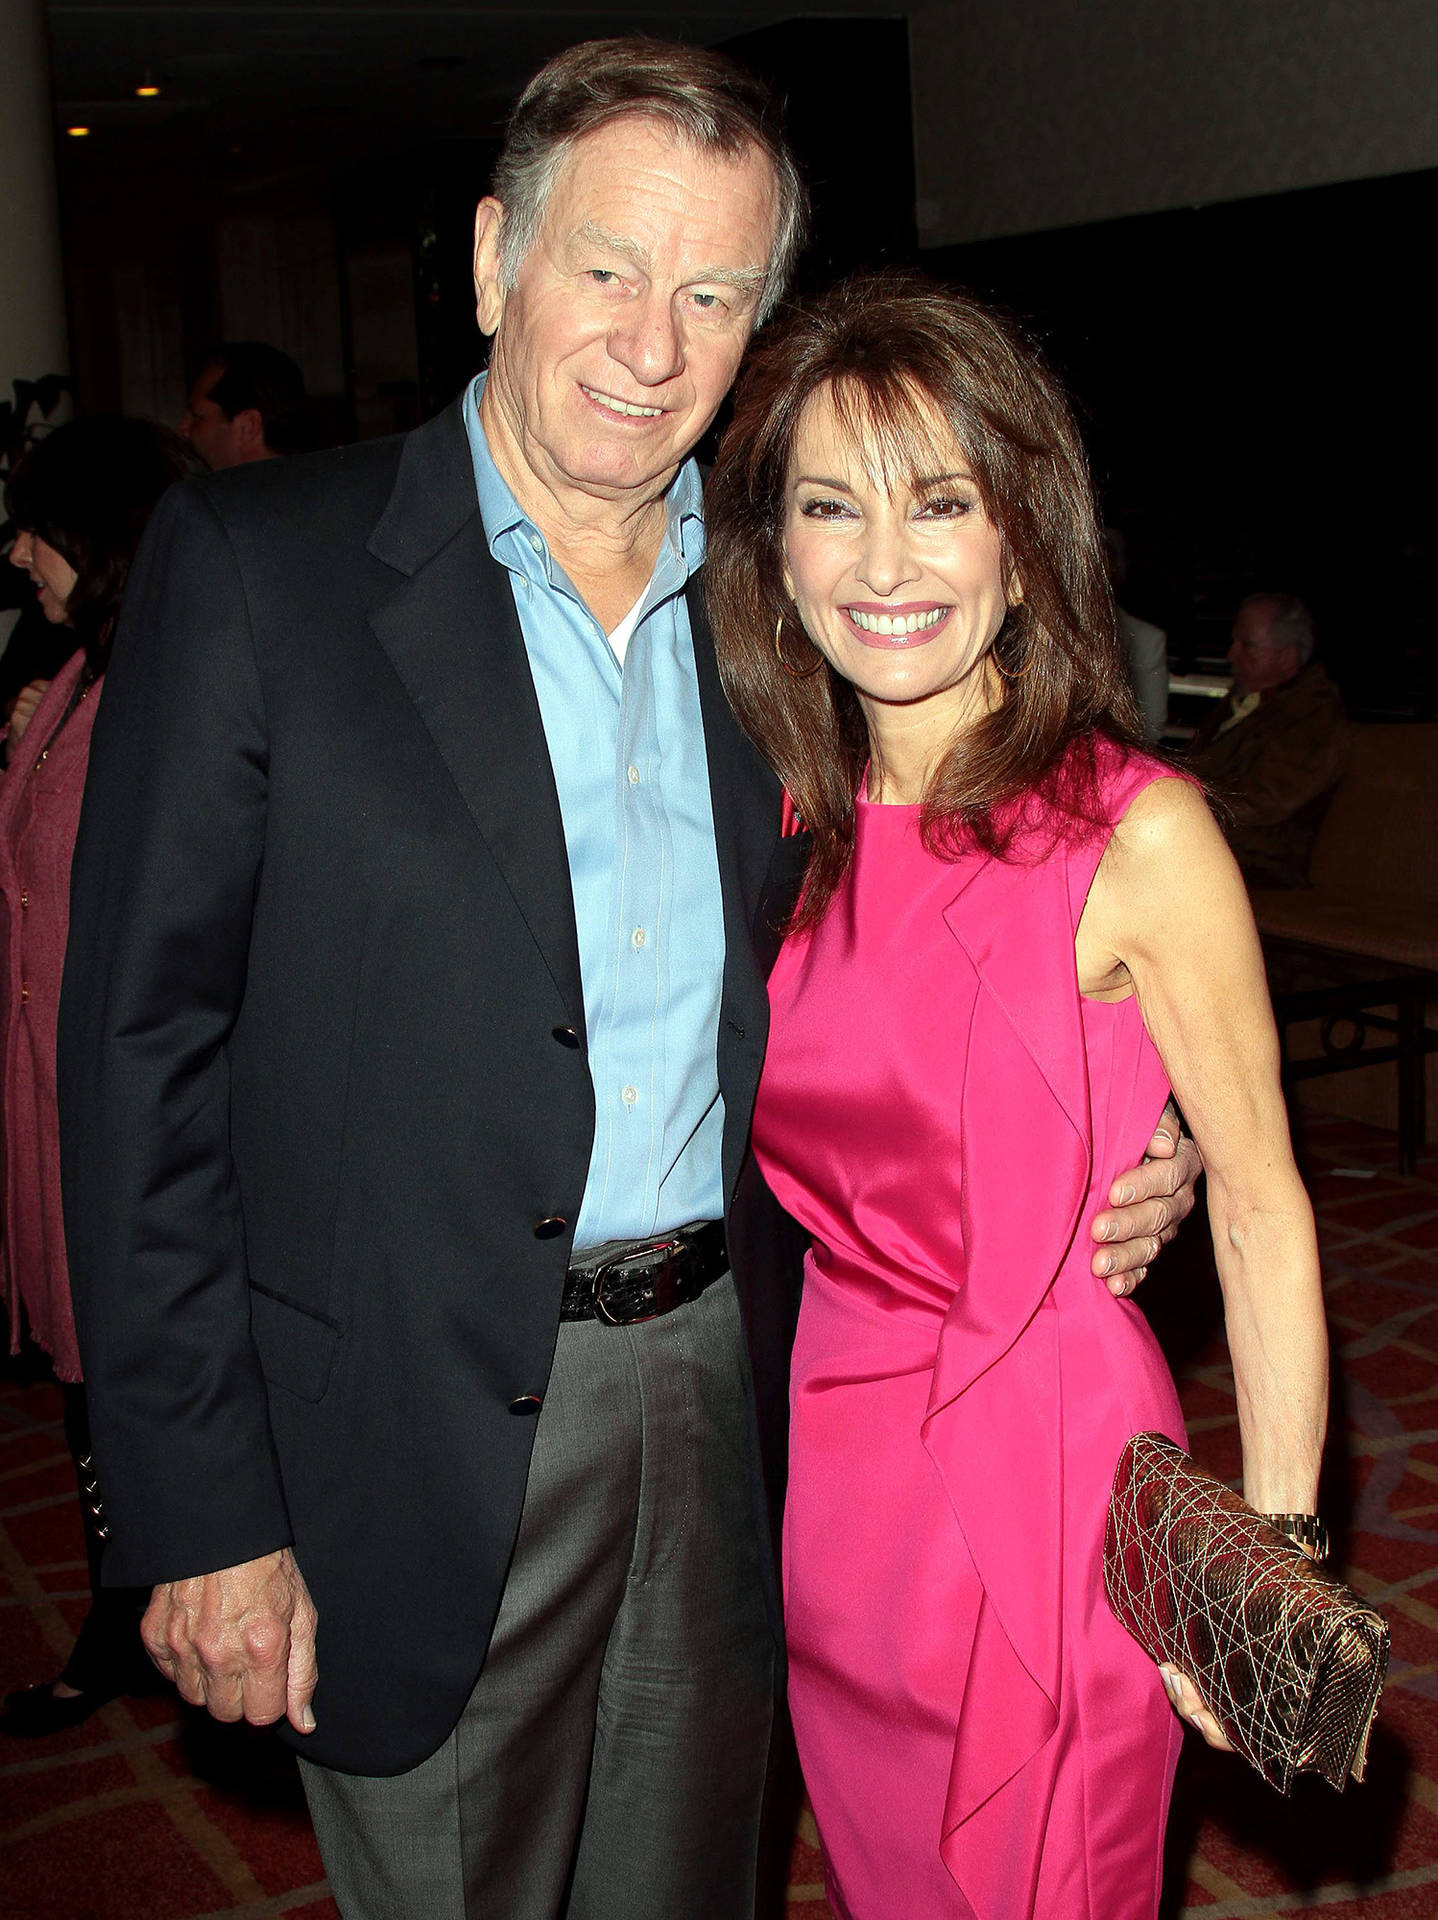 Susan Lucci and Helmut Huber attending an event together Wallpaper